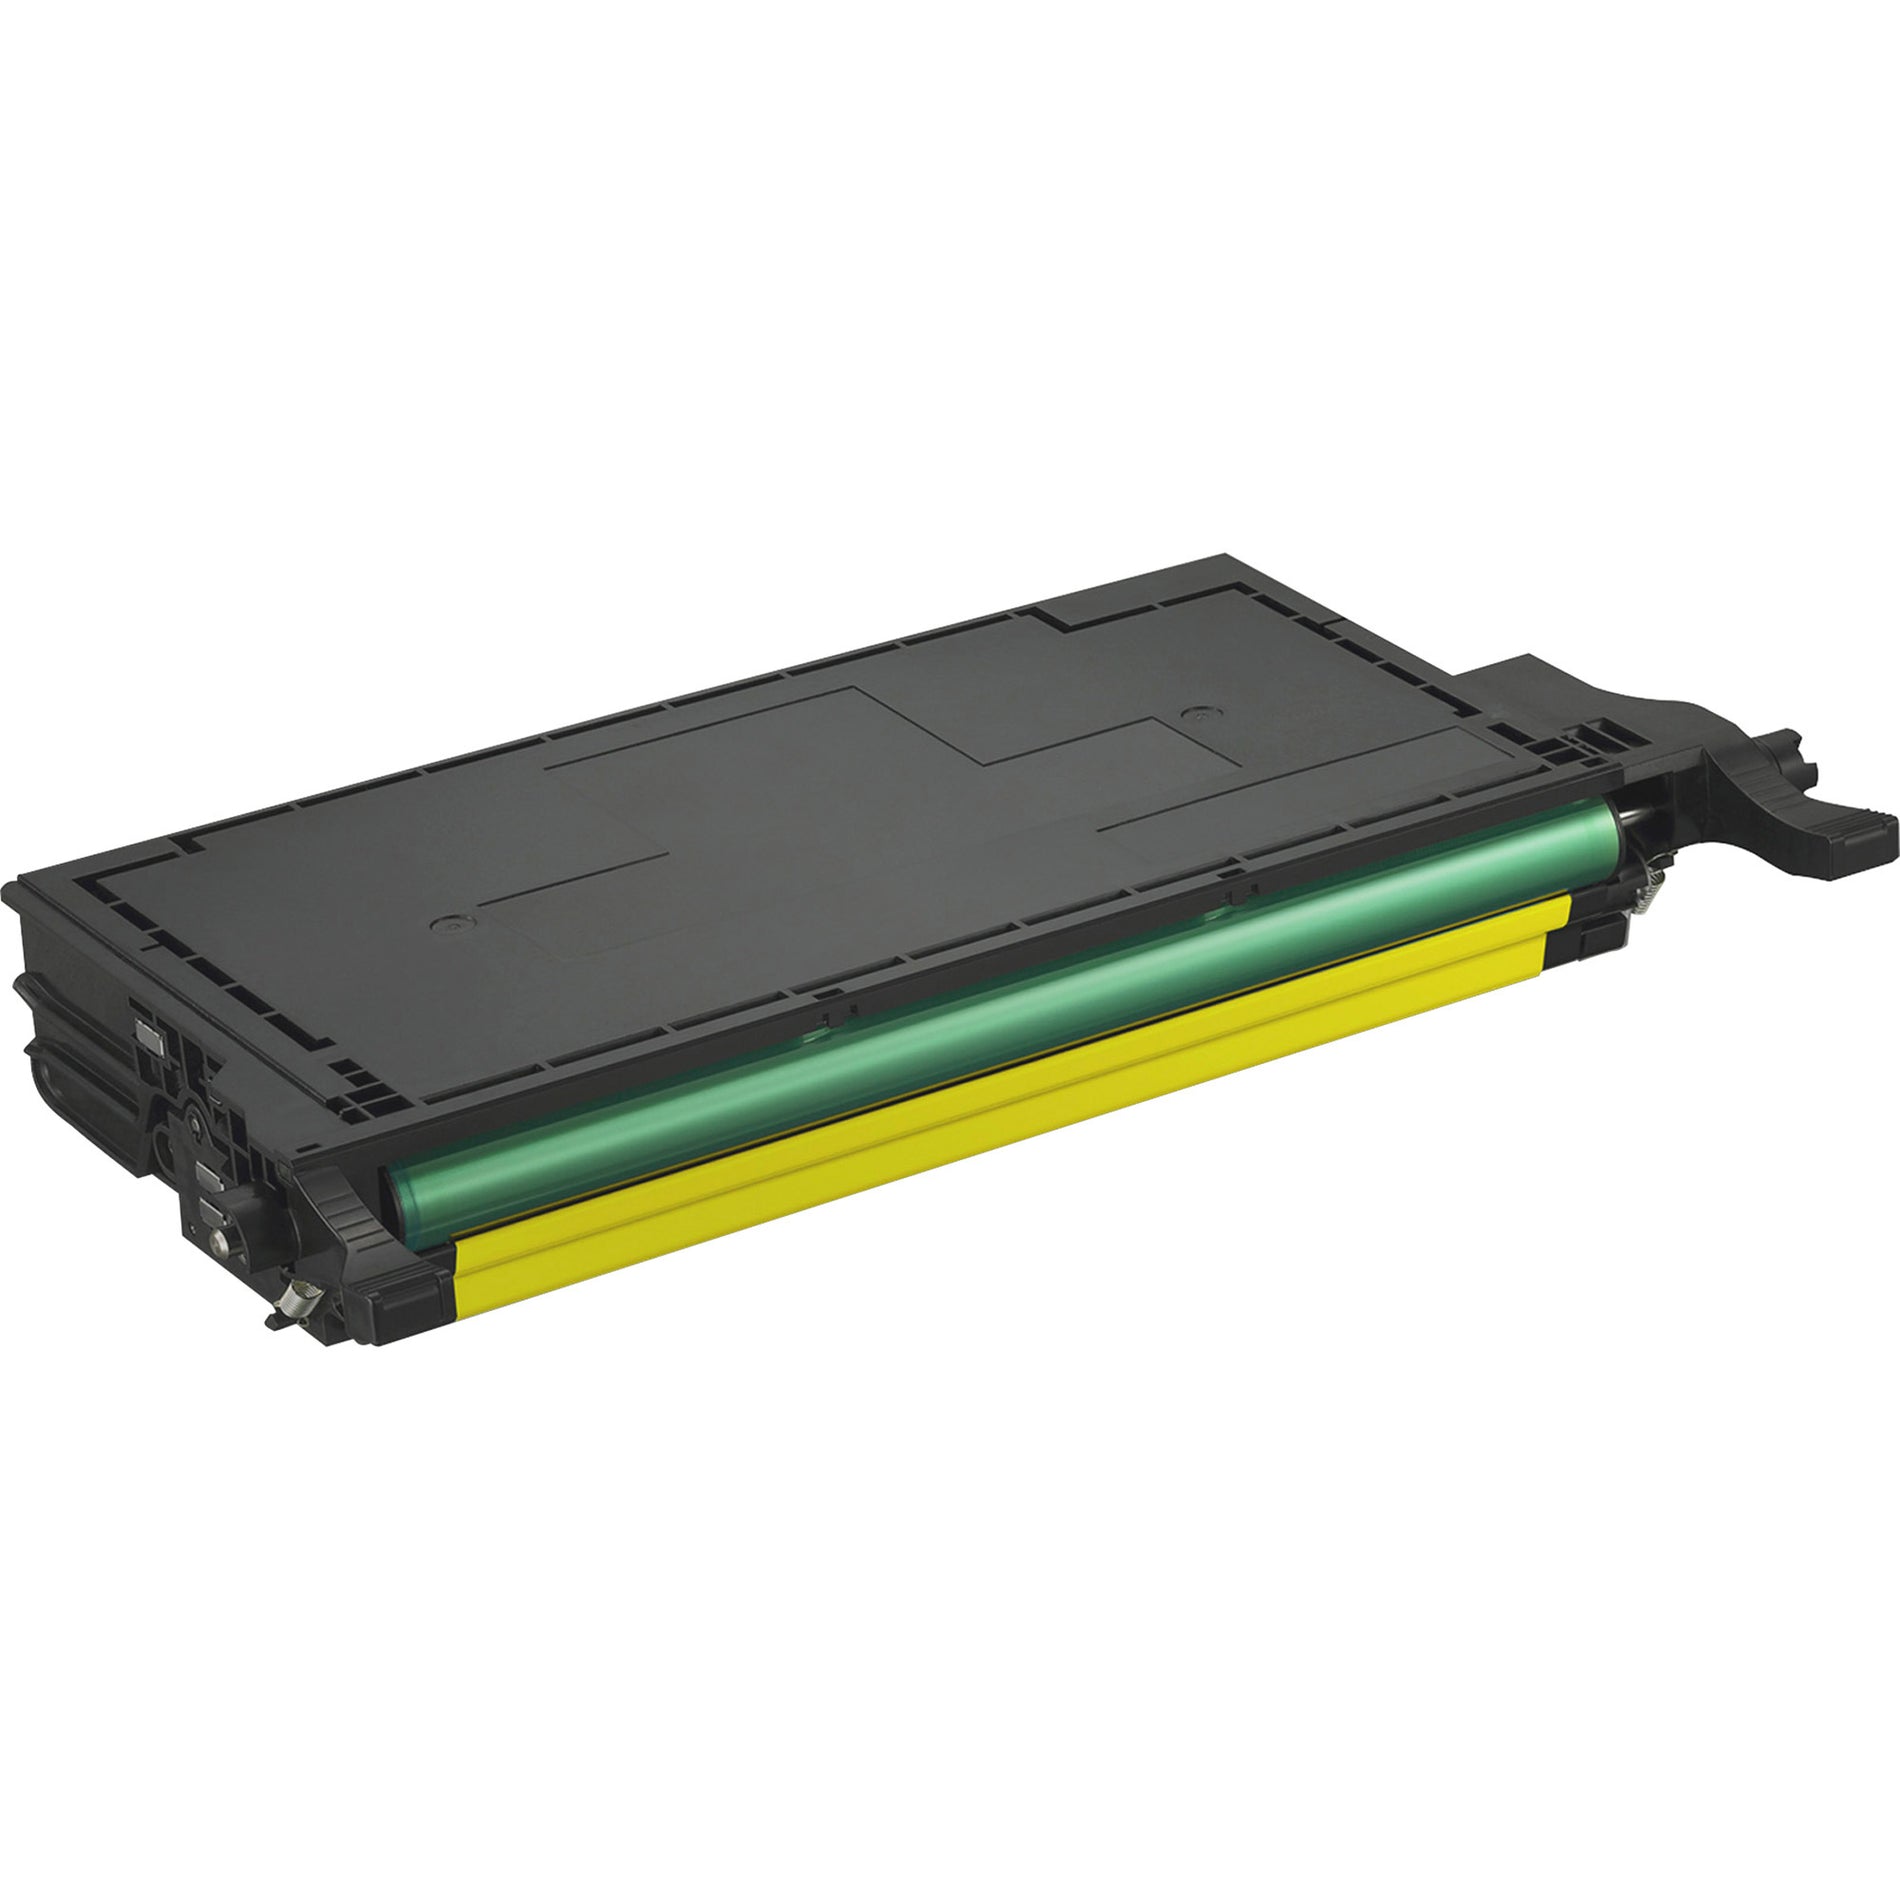 Samsung CLT-Y508S CLTC508S Toner Cartridge, Yellow, 2,000 Pages Yield